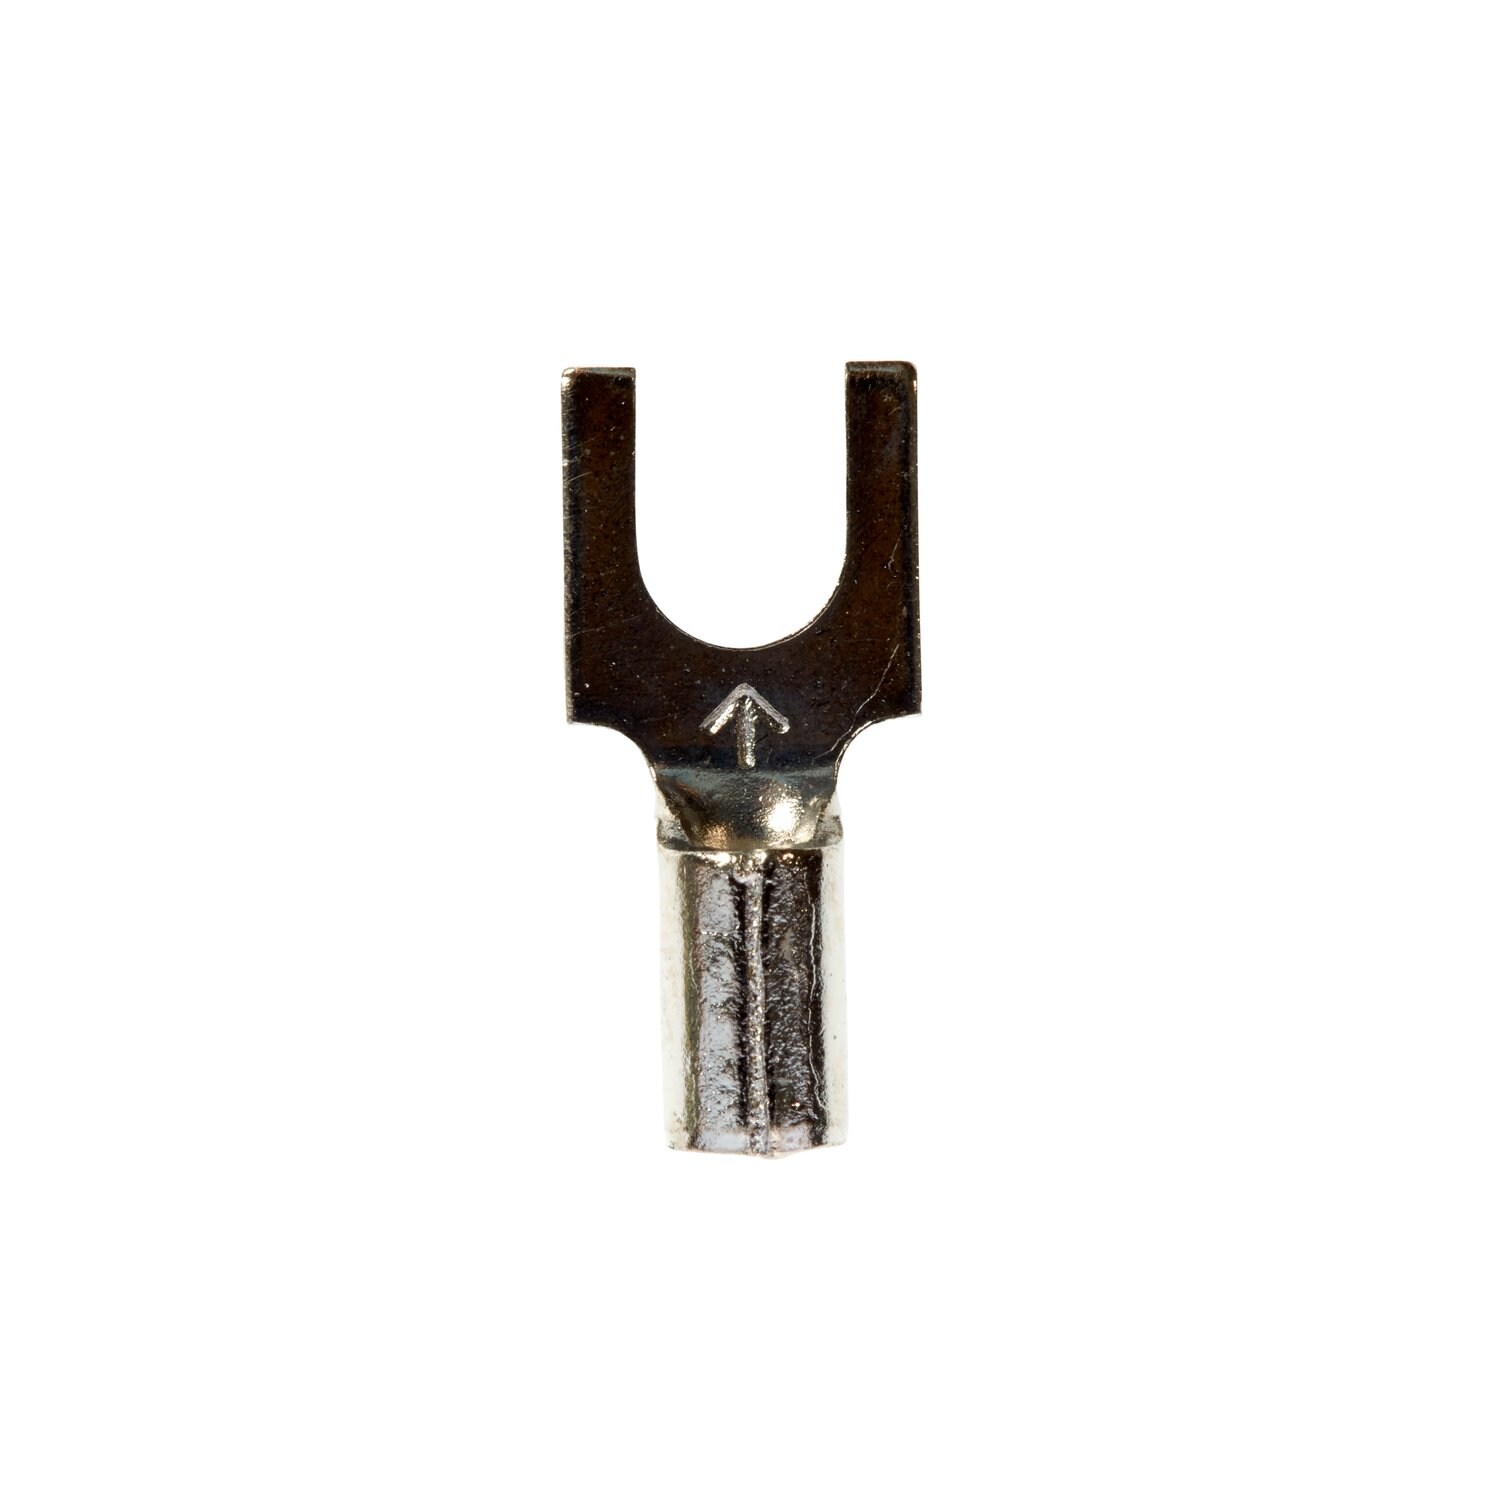 7100164026 - 3M Scotchlok Block Fork, Non-Insulated Brazed Seam M14-8FBK, Stud Size
8, suitable for use in a terminal block, 1000/Case